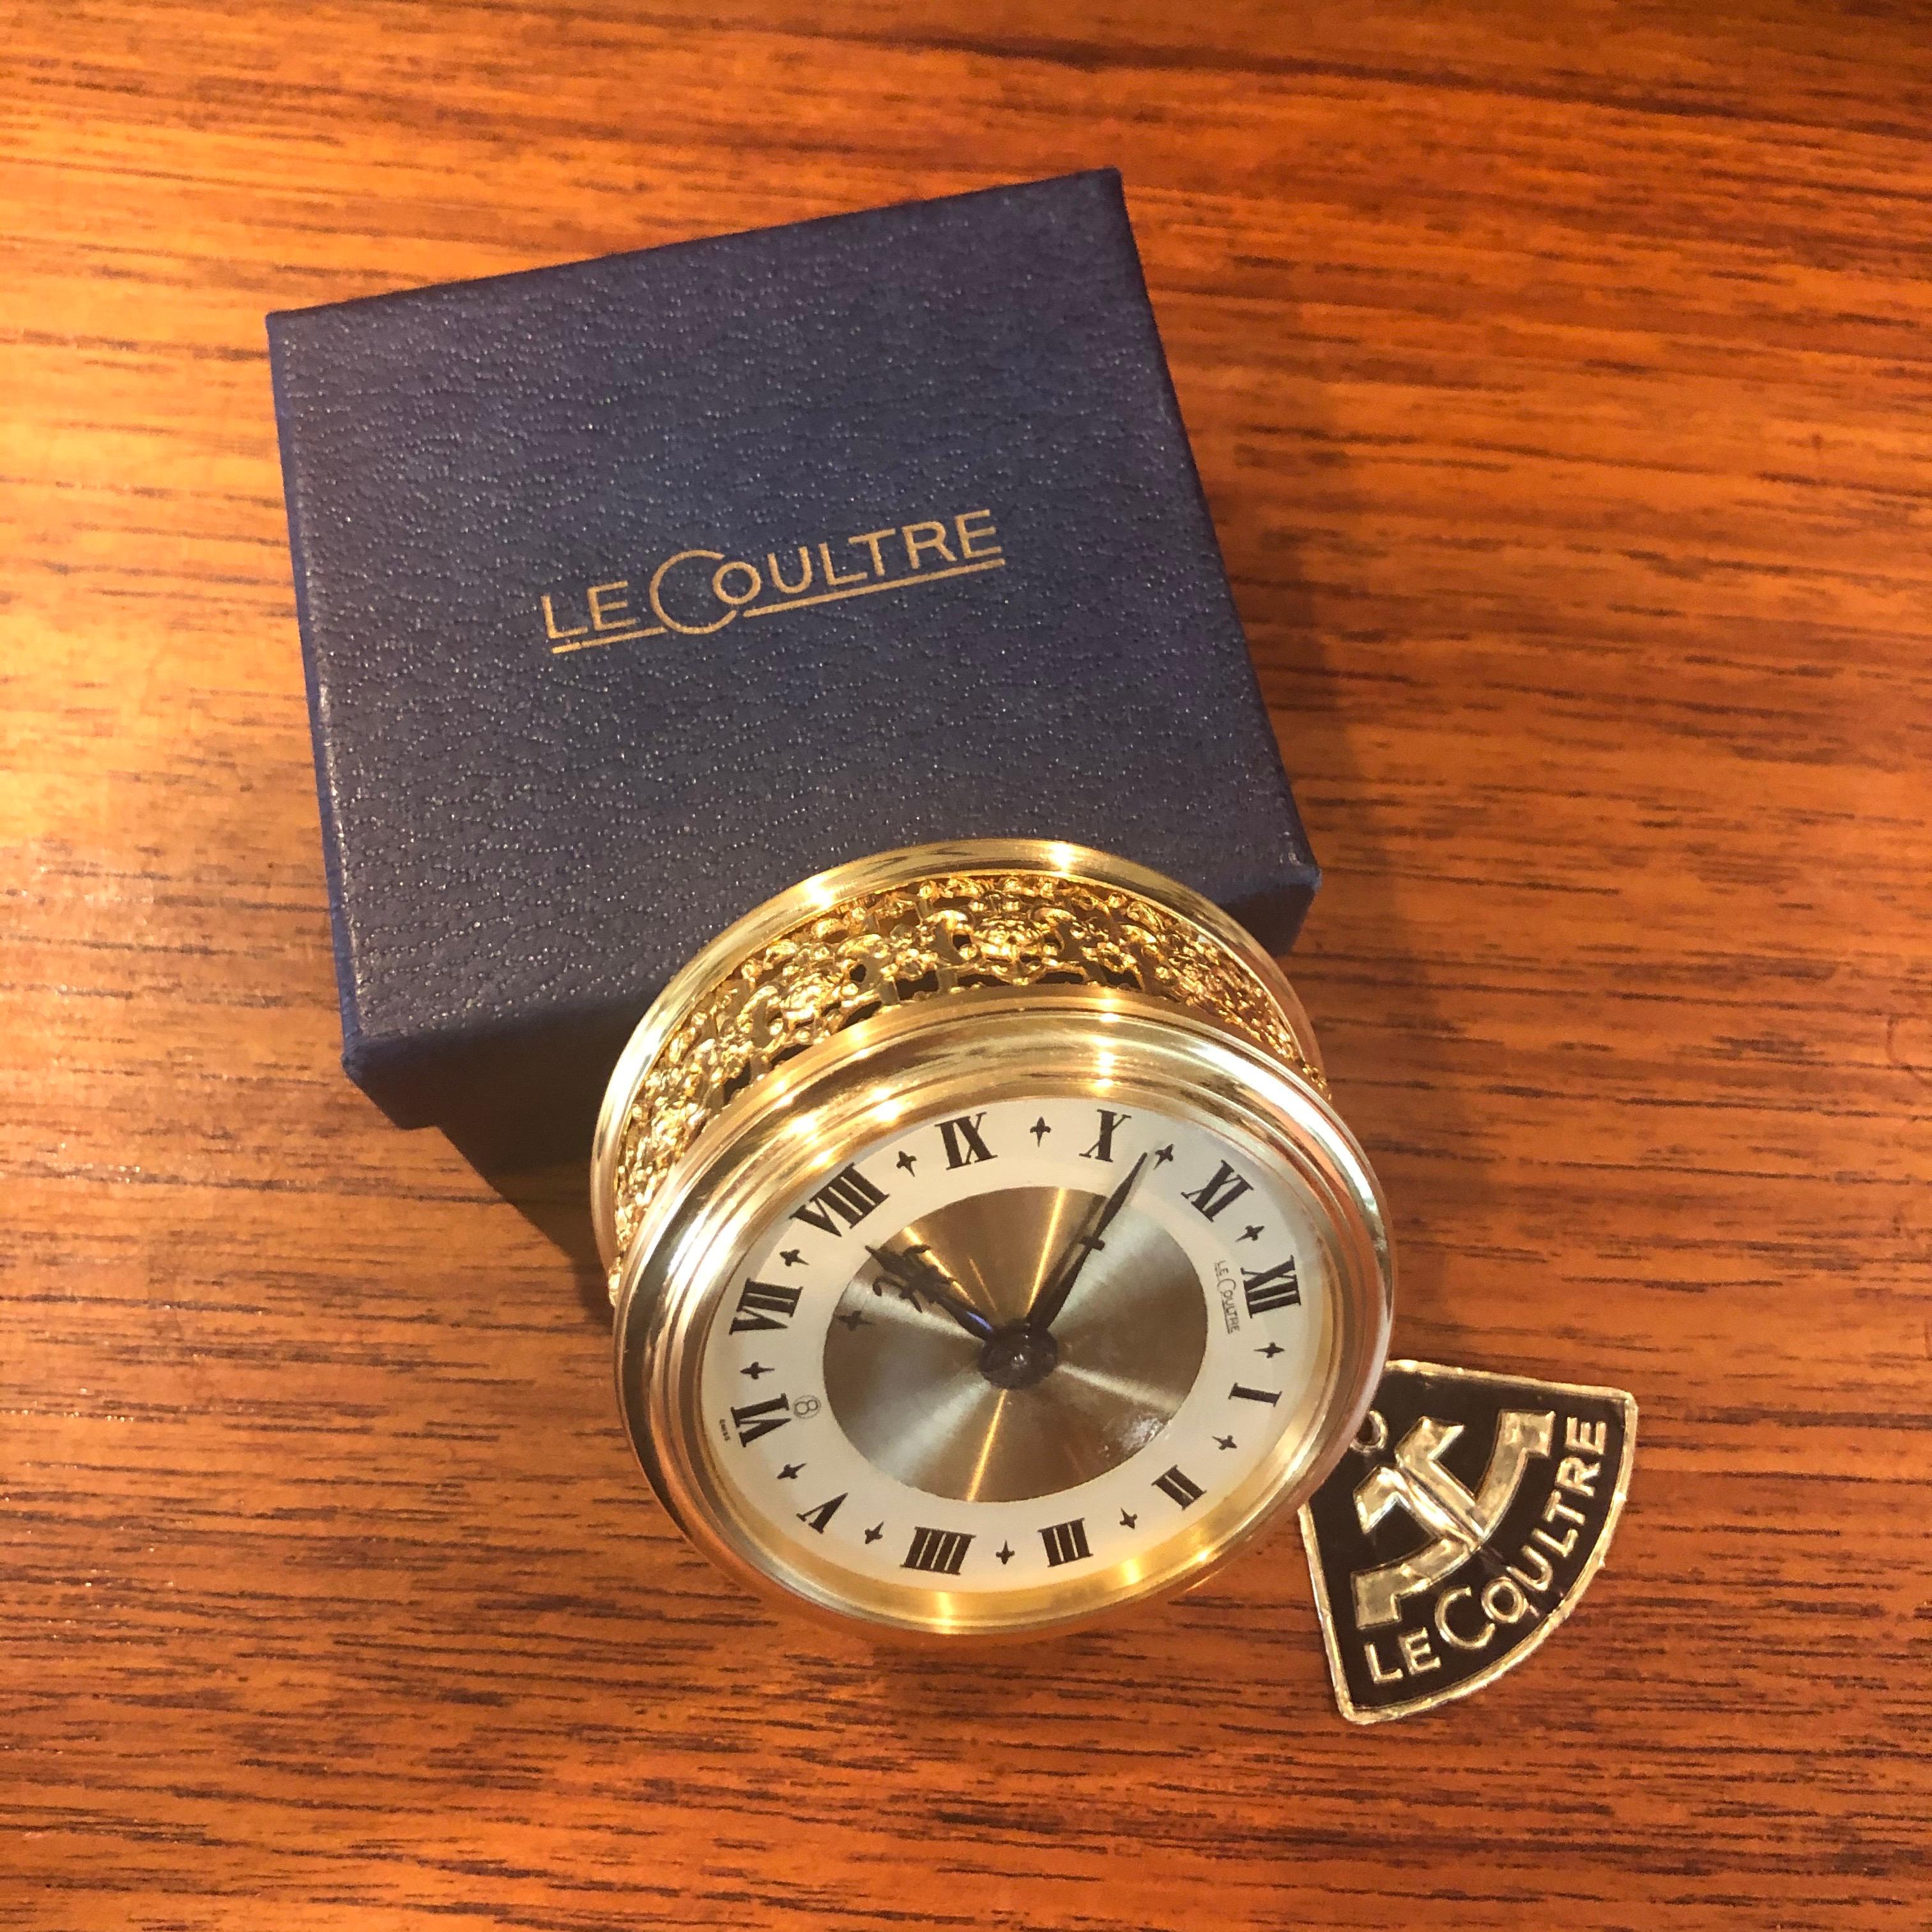 Lovely vintage brass eight day miniature travel alarm clock by LeCoultre, circa 1960s. The piece is essentially brand new in box with papers and warranty card and is model #77. Setup mode and dials on back.

The clock is Swiss made, beautiful